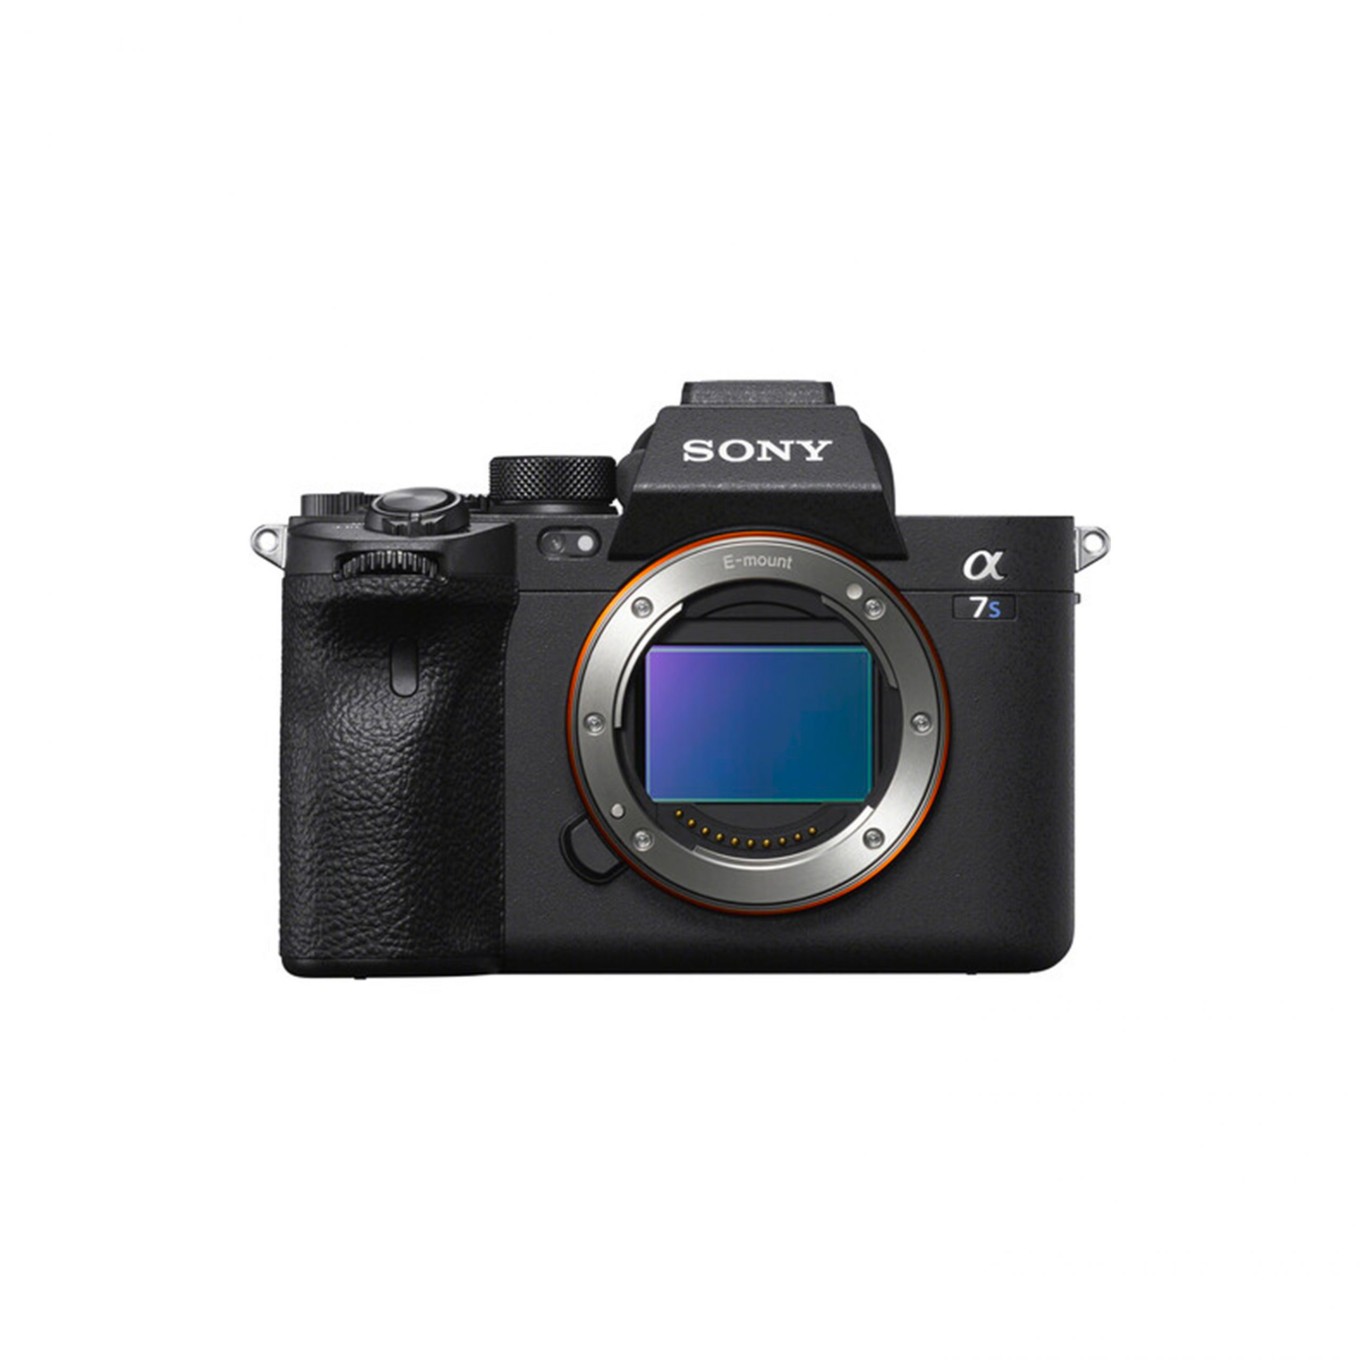 Sony a7S III for hire in Milan, Sony alpha 7s III for rent in Milan, Sony a7S3 for rent in Milan